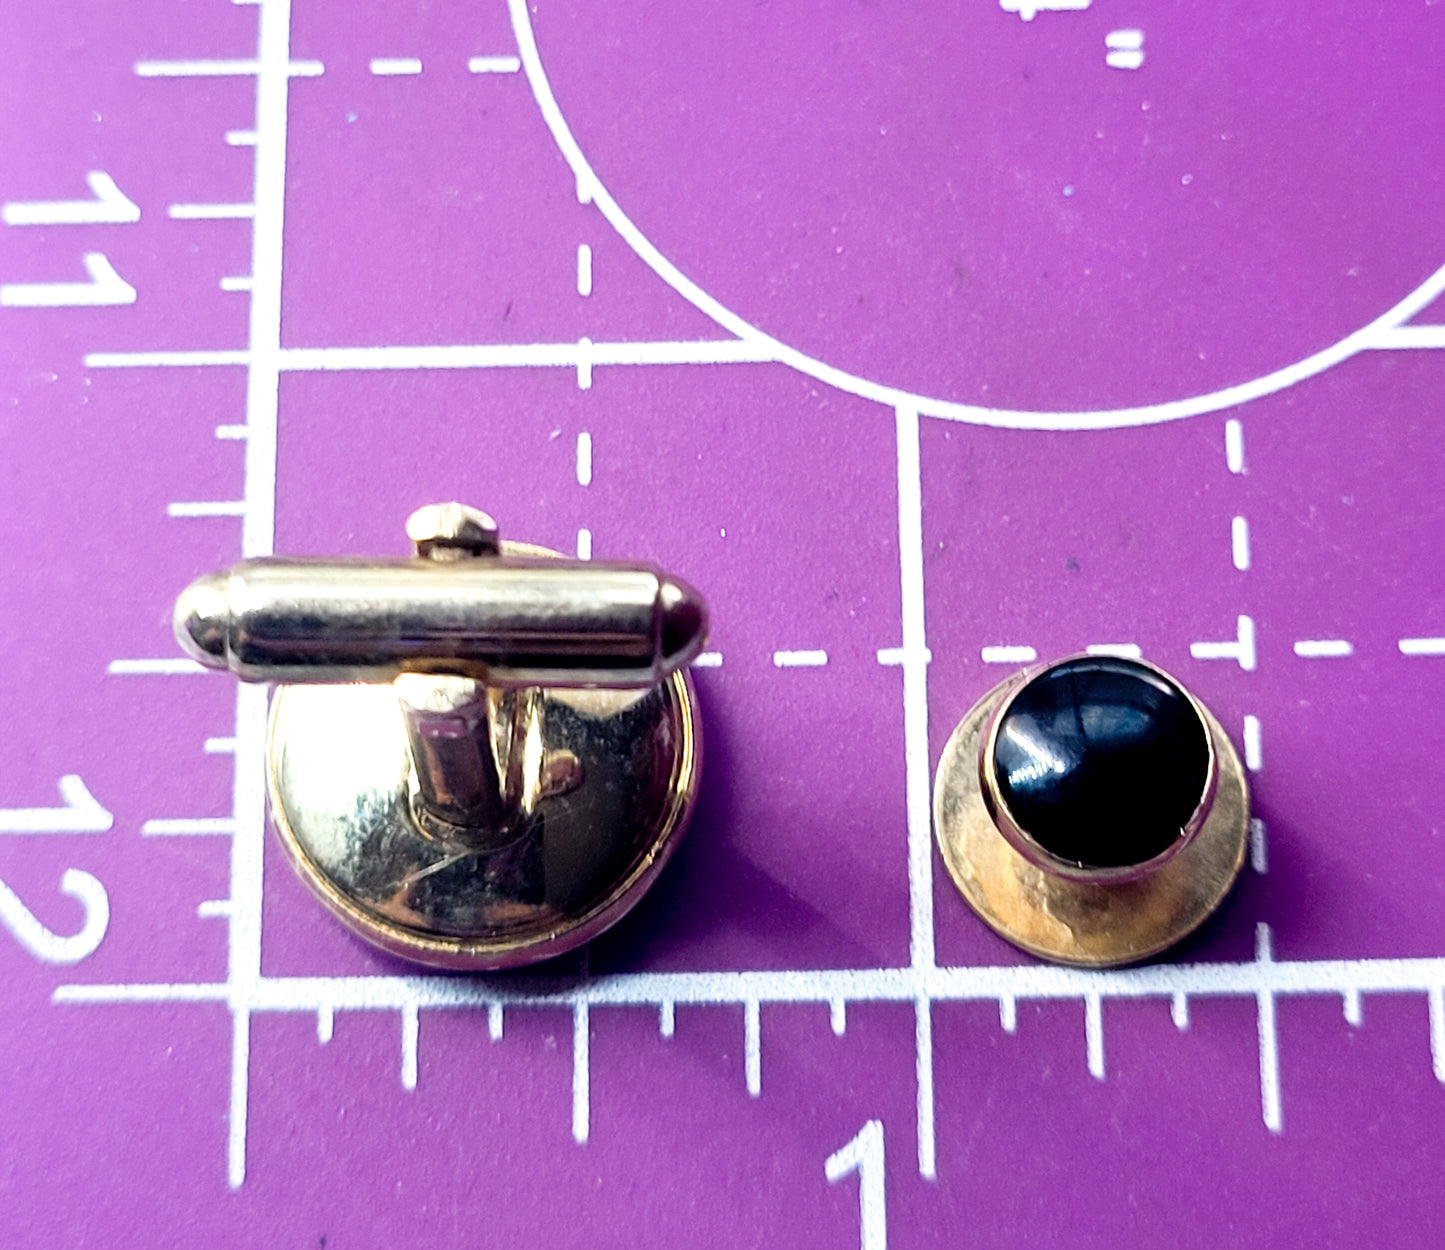 Sheild's black and gold cufflink and collar stud vintage signed set